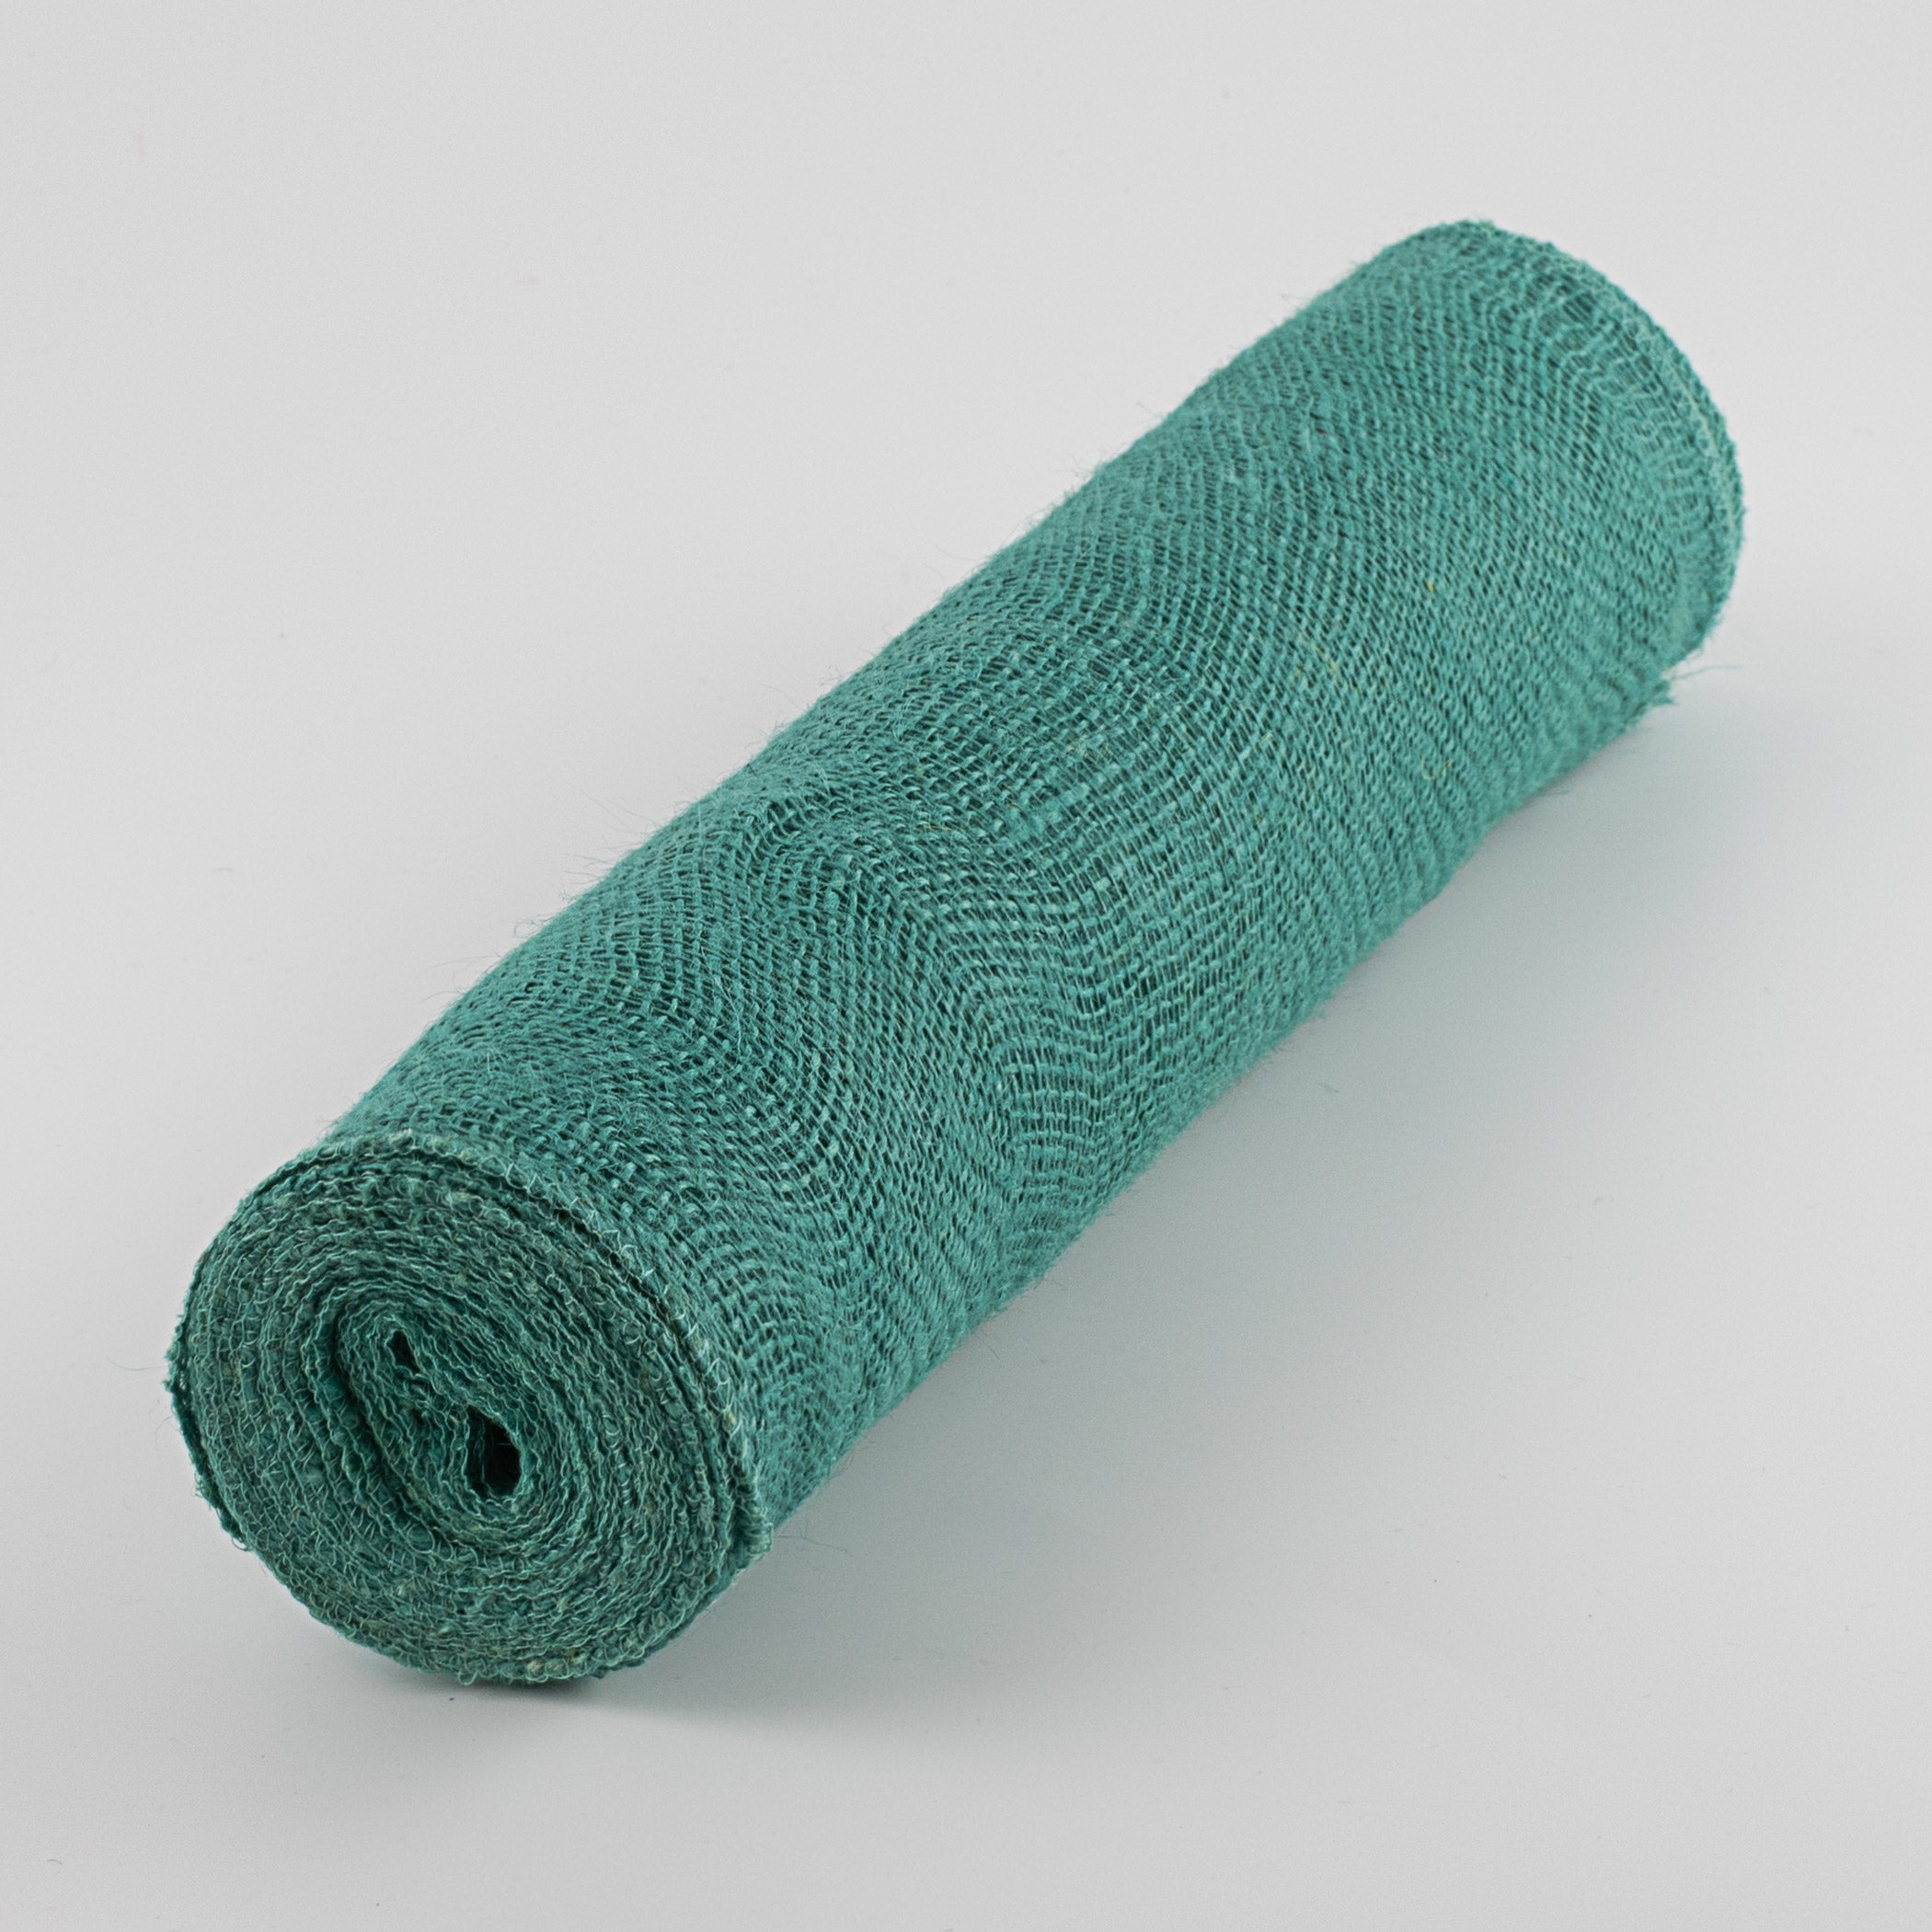 18" Colorfast Loose Weave Burlap: Turquoise (10 Yards)